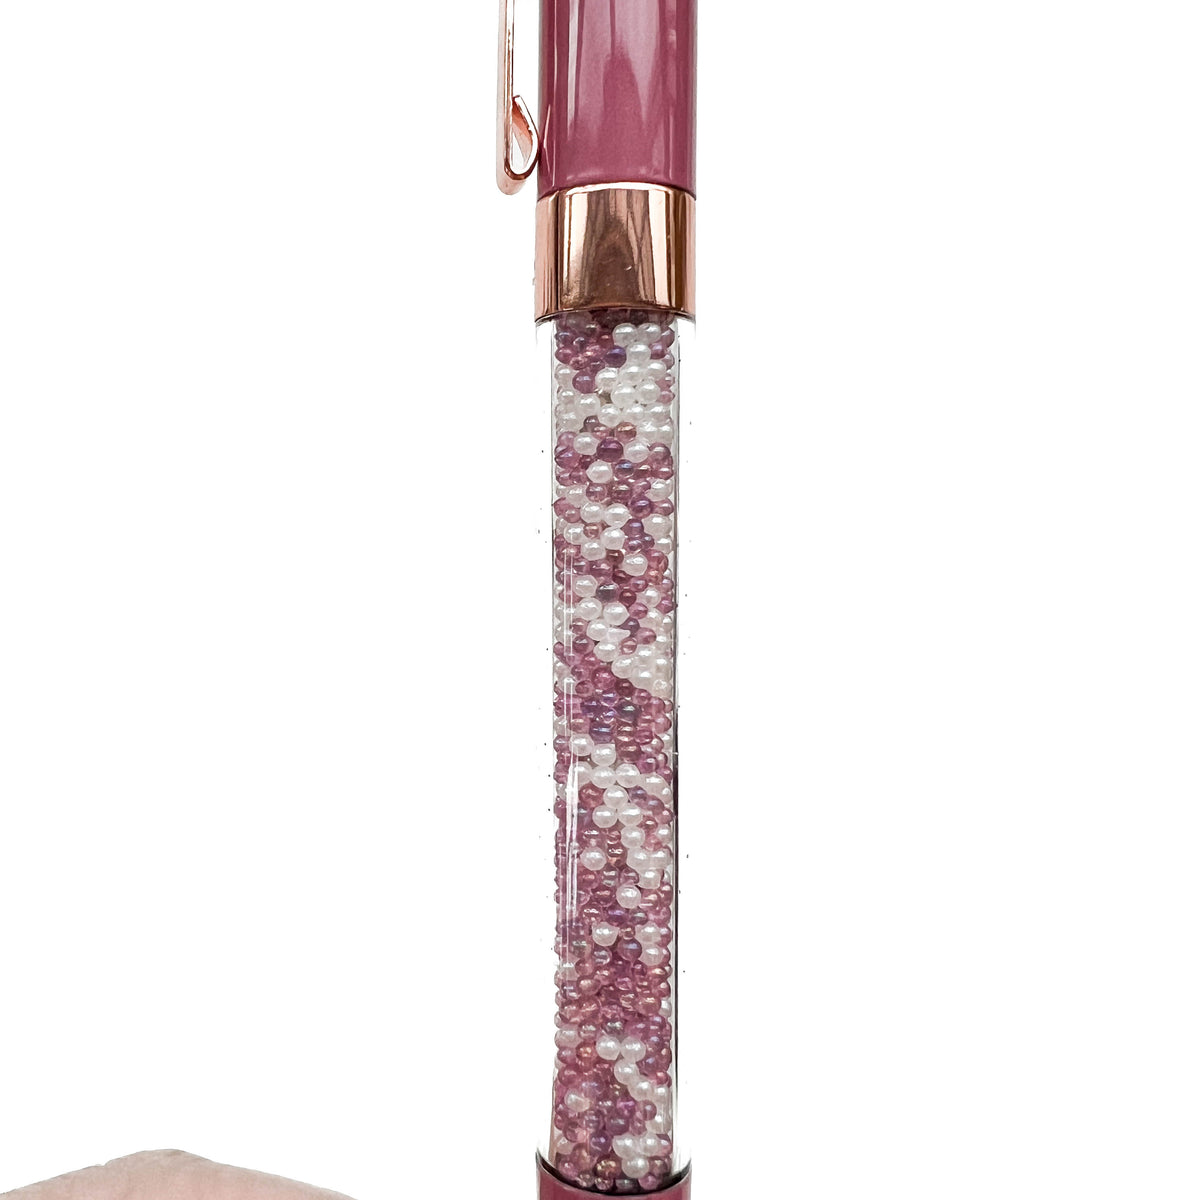 Swoon Crystal VBPen | limited pen